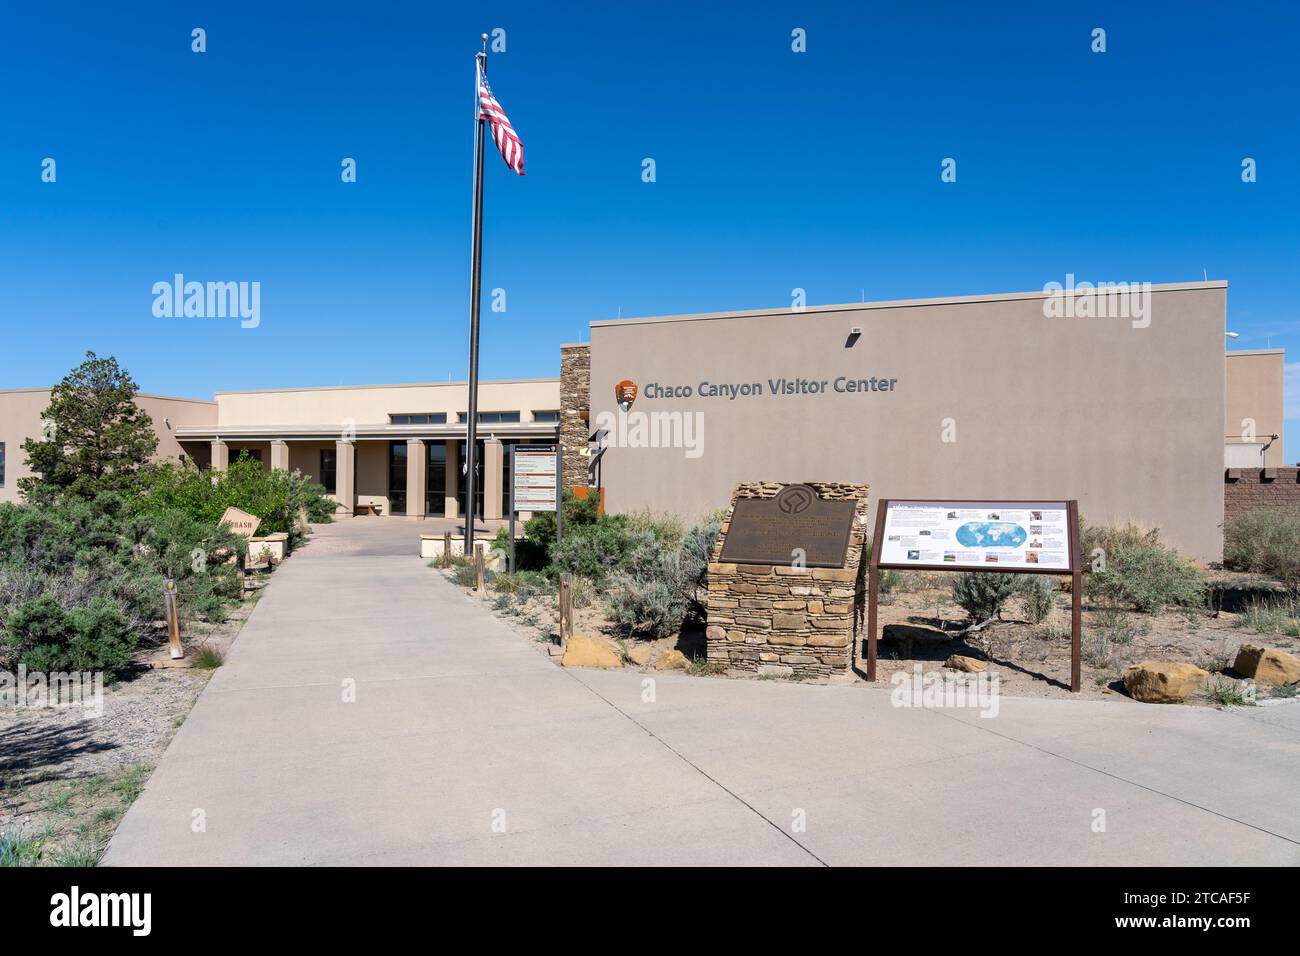 Chaco Canyon Visitor Center in Chaco Culture National Historical Park, New Mexico, USA Stock Photo